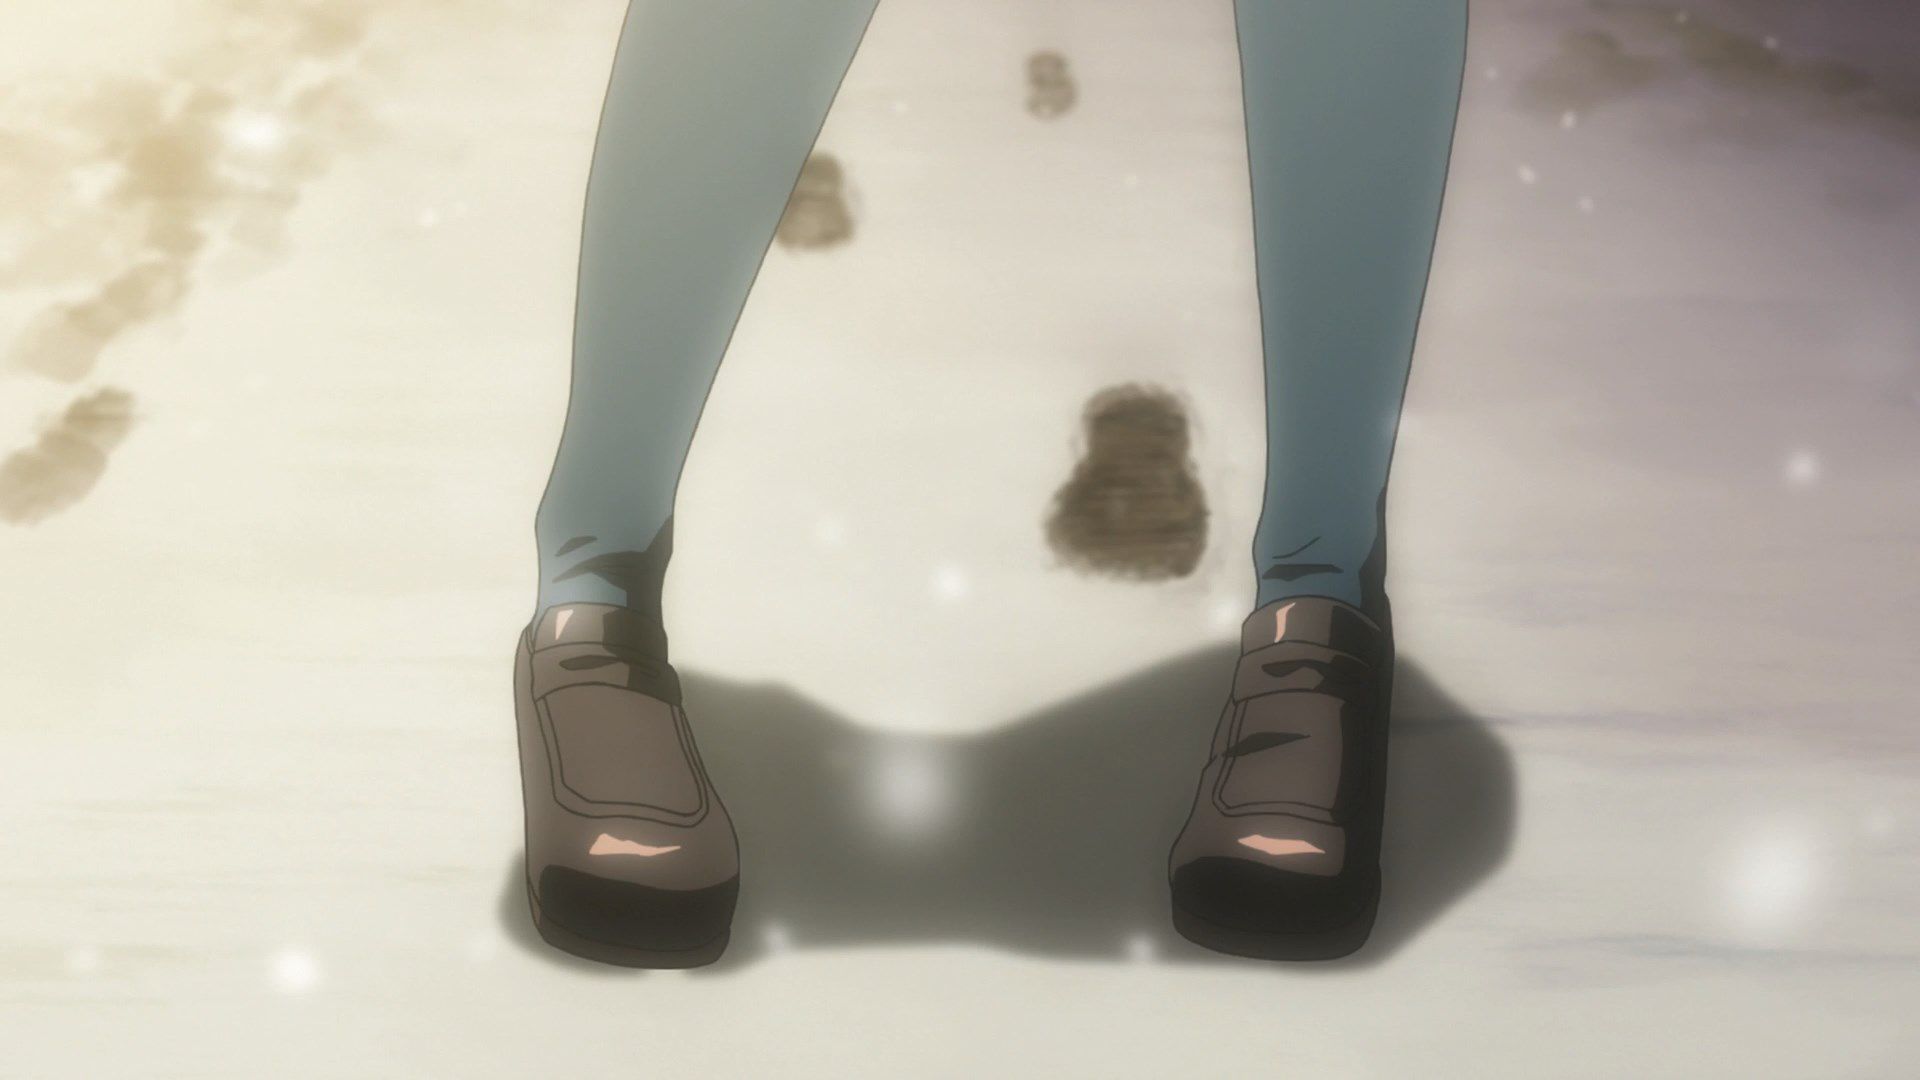 [God images] "love live! ' Μm ' PV's leg is too erotic everyone wakes up to a leg fetish of wwwww 9